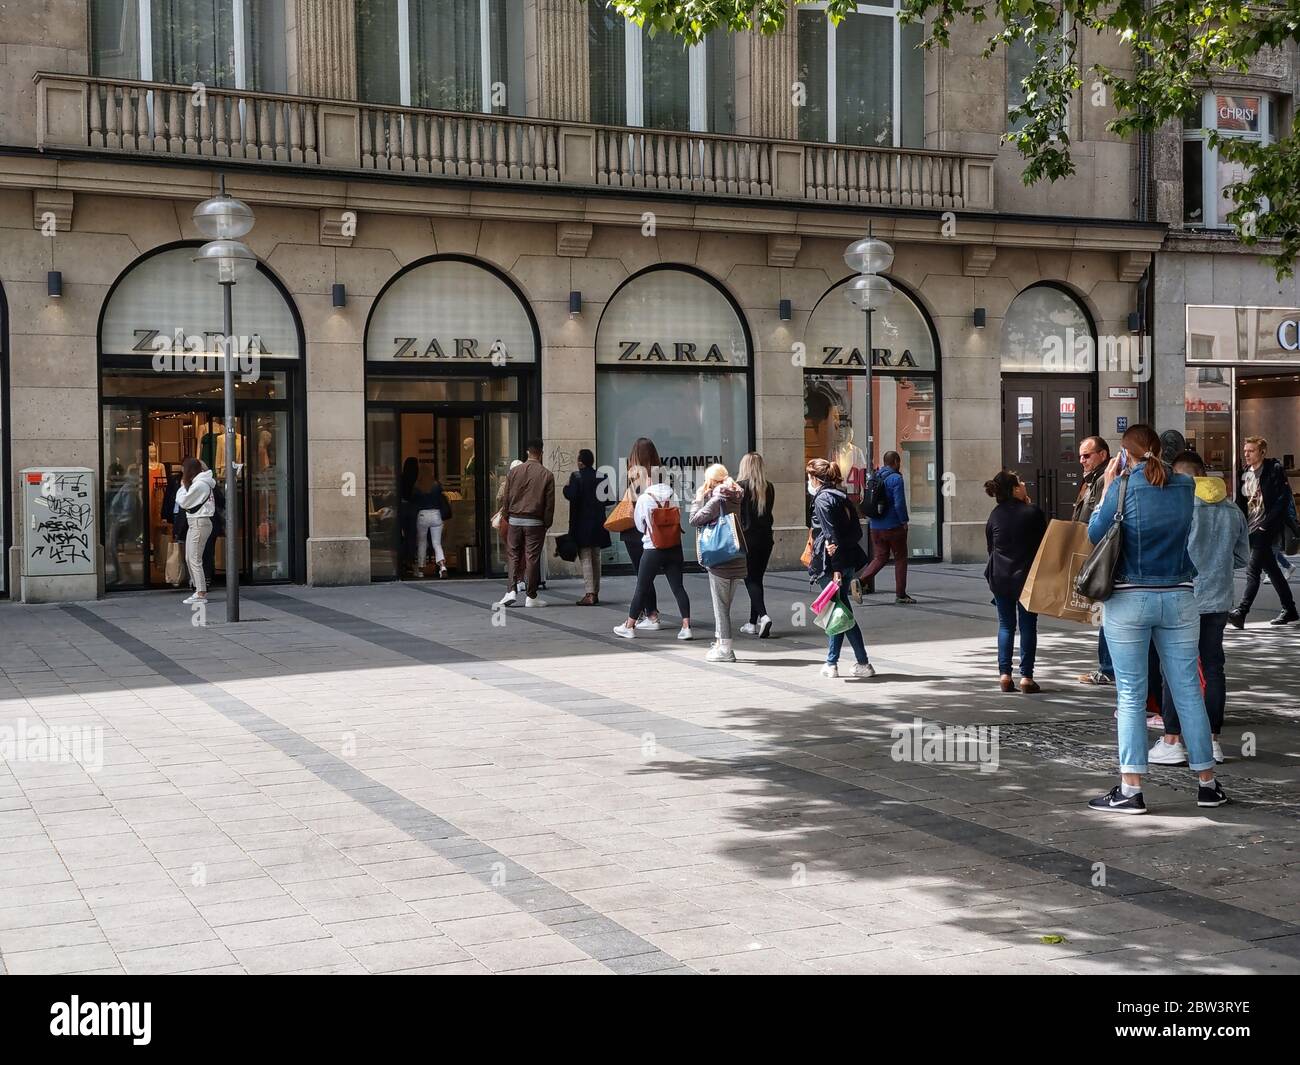 Munich, Bavaria, Germany. 29th May, 2020. Typical lines to get into Zara  stores in Munich, Germany. Credit: Sachelle Babbar/ZUMA Wire/Alamy Live  News Stock Photo - Alamy